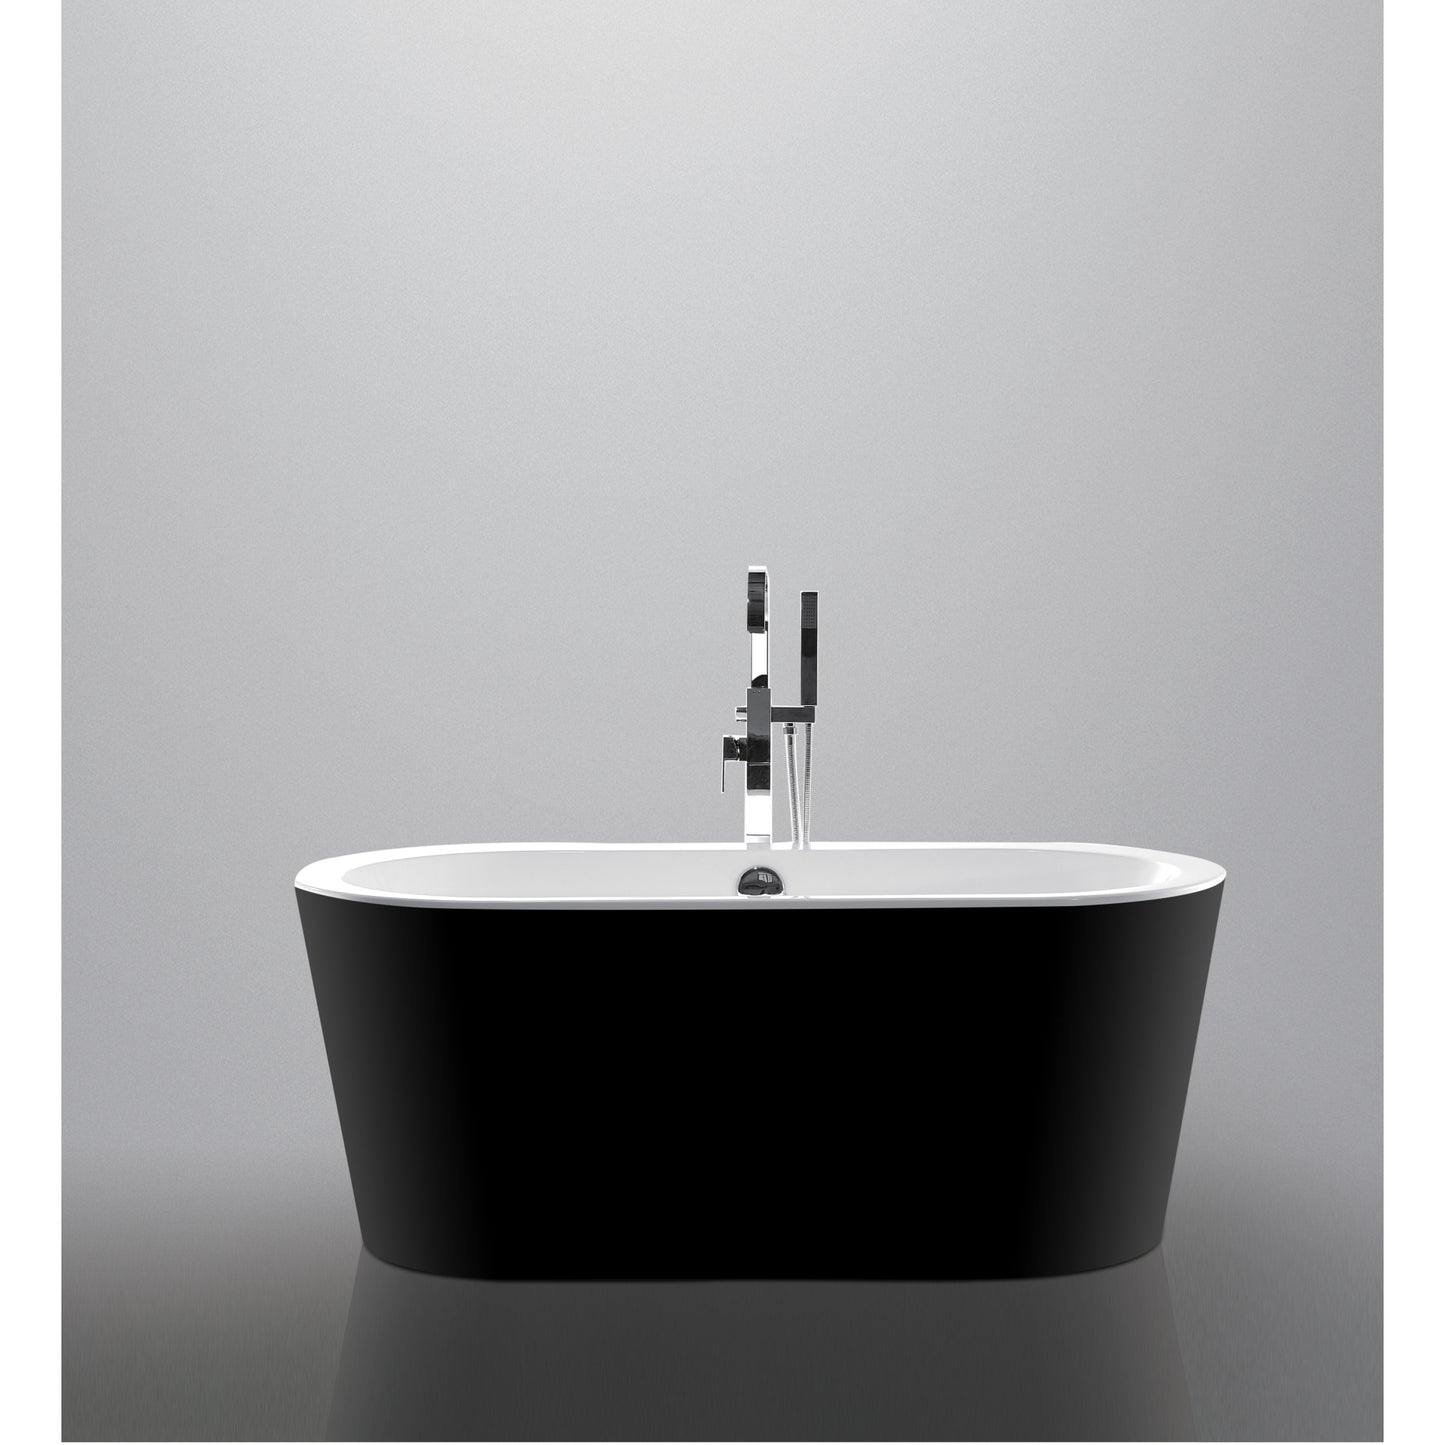 59" 100% Black Acrylic Freestanding Bathtub Contemporary Soaking Tub with Brushed Nickel Overflow and Drain